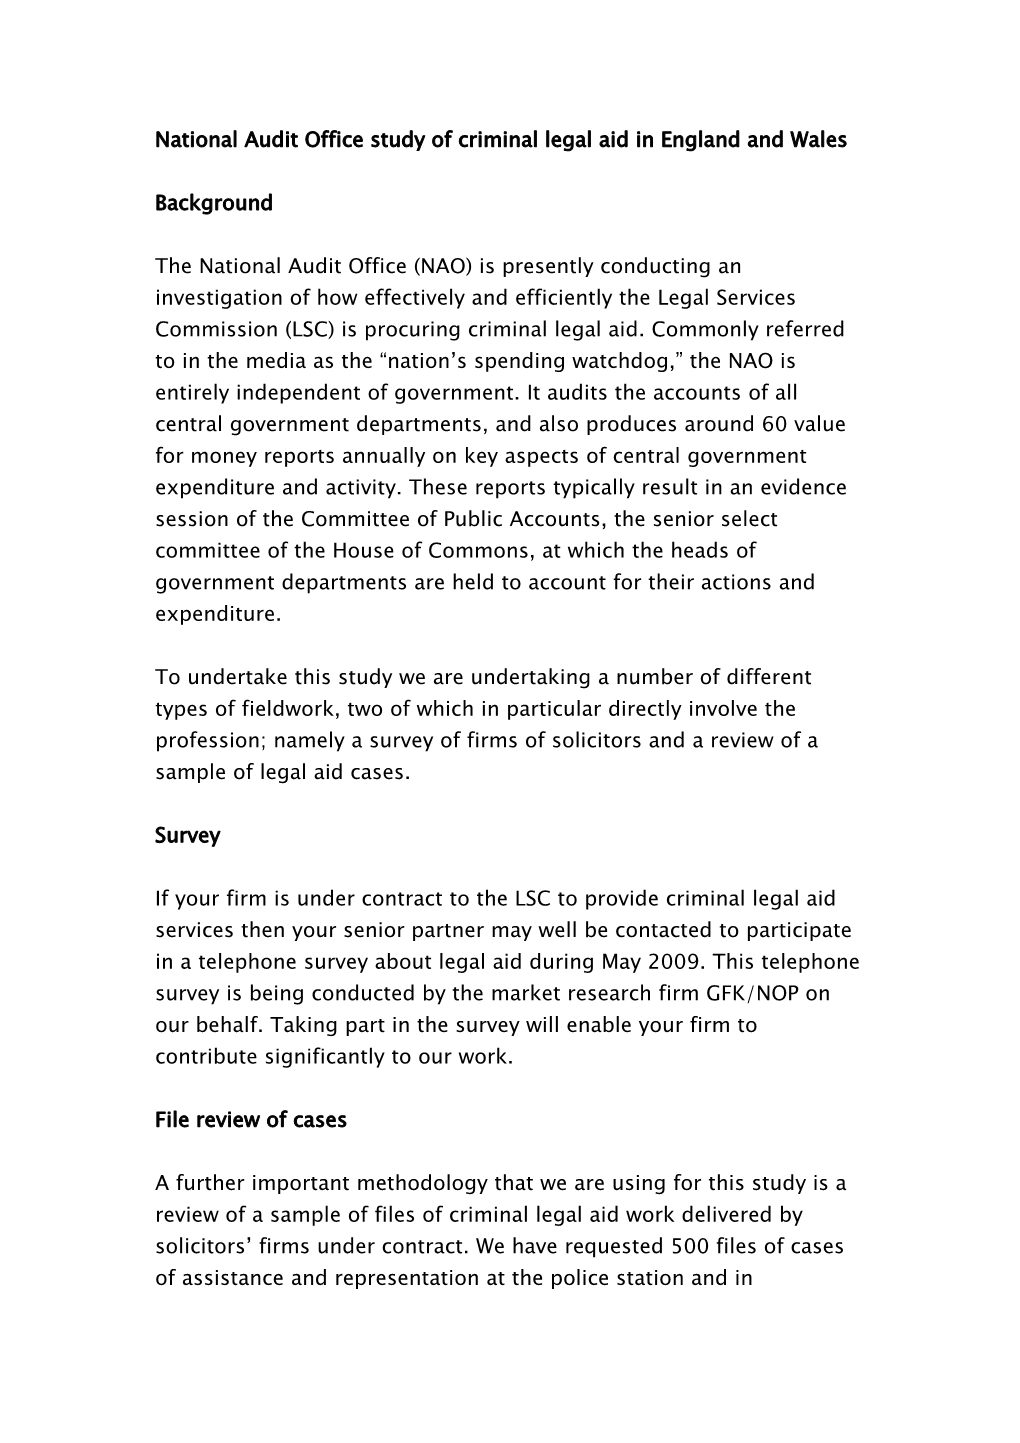 National Audit Office Survey of Criminal Legal Aid Solicitors Firms in England and Wales